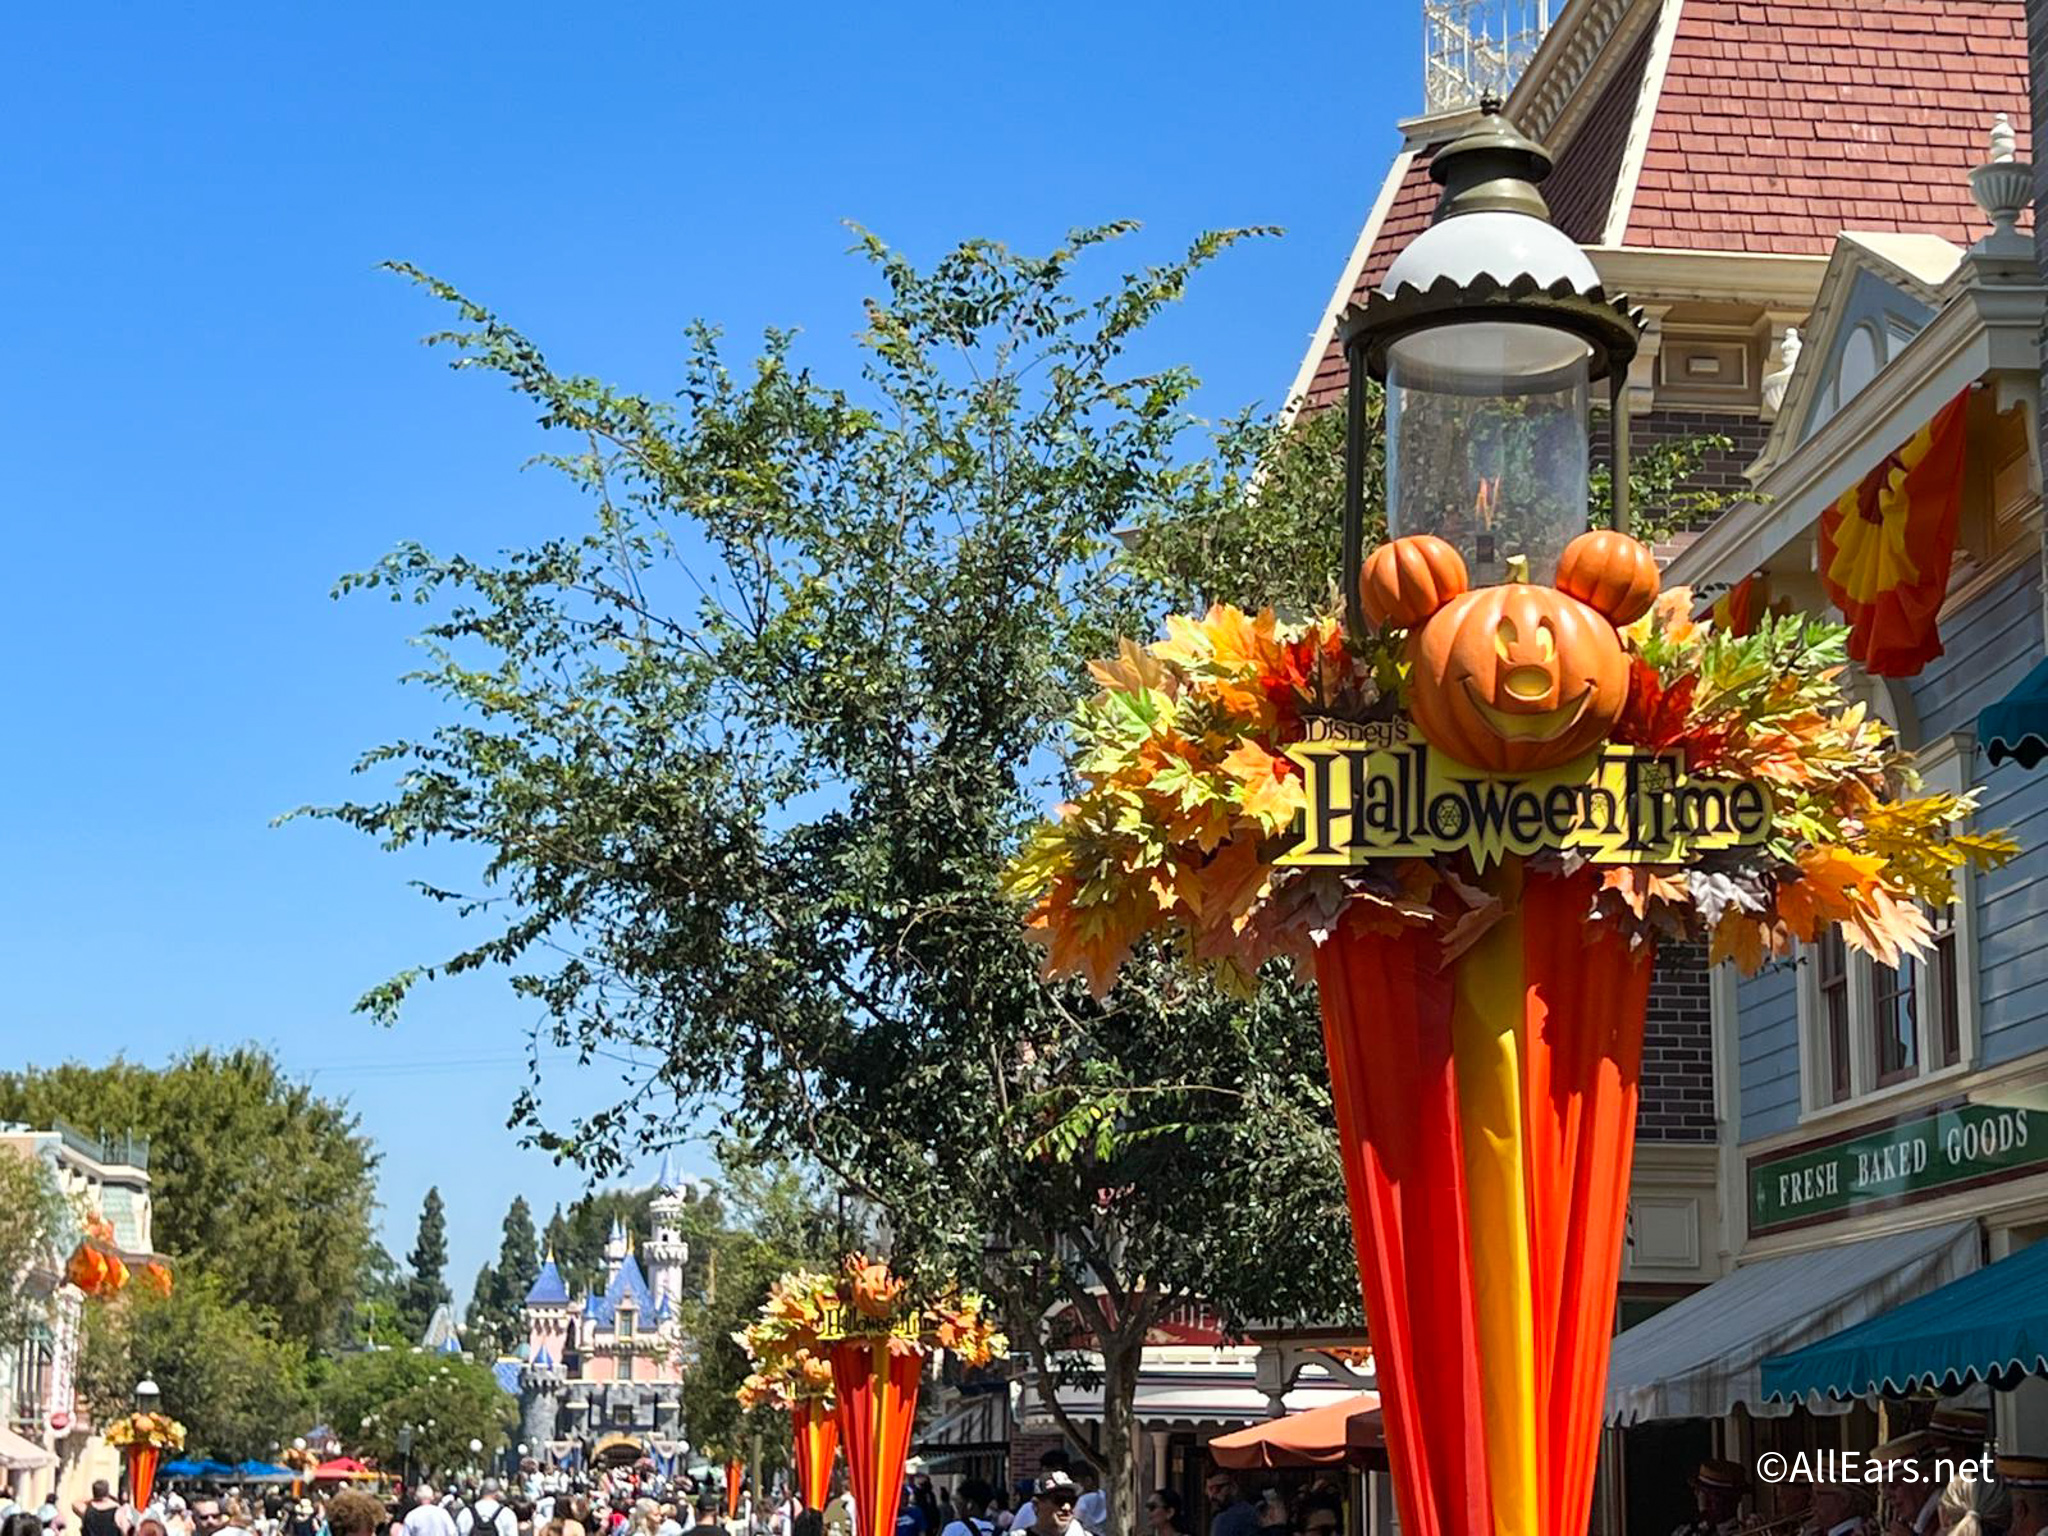 PHOTOS: Check Out Disneyland's Halloween Decorations!